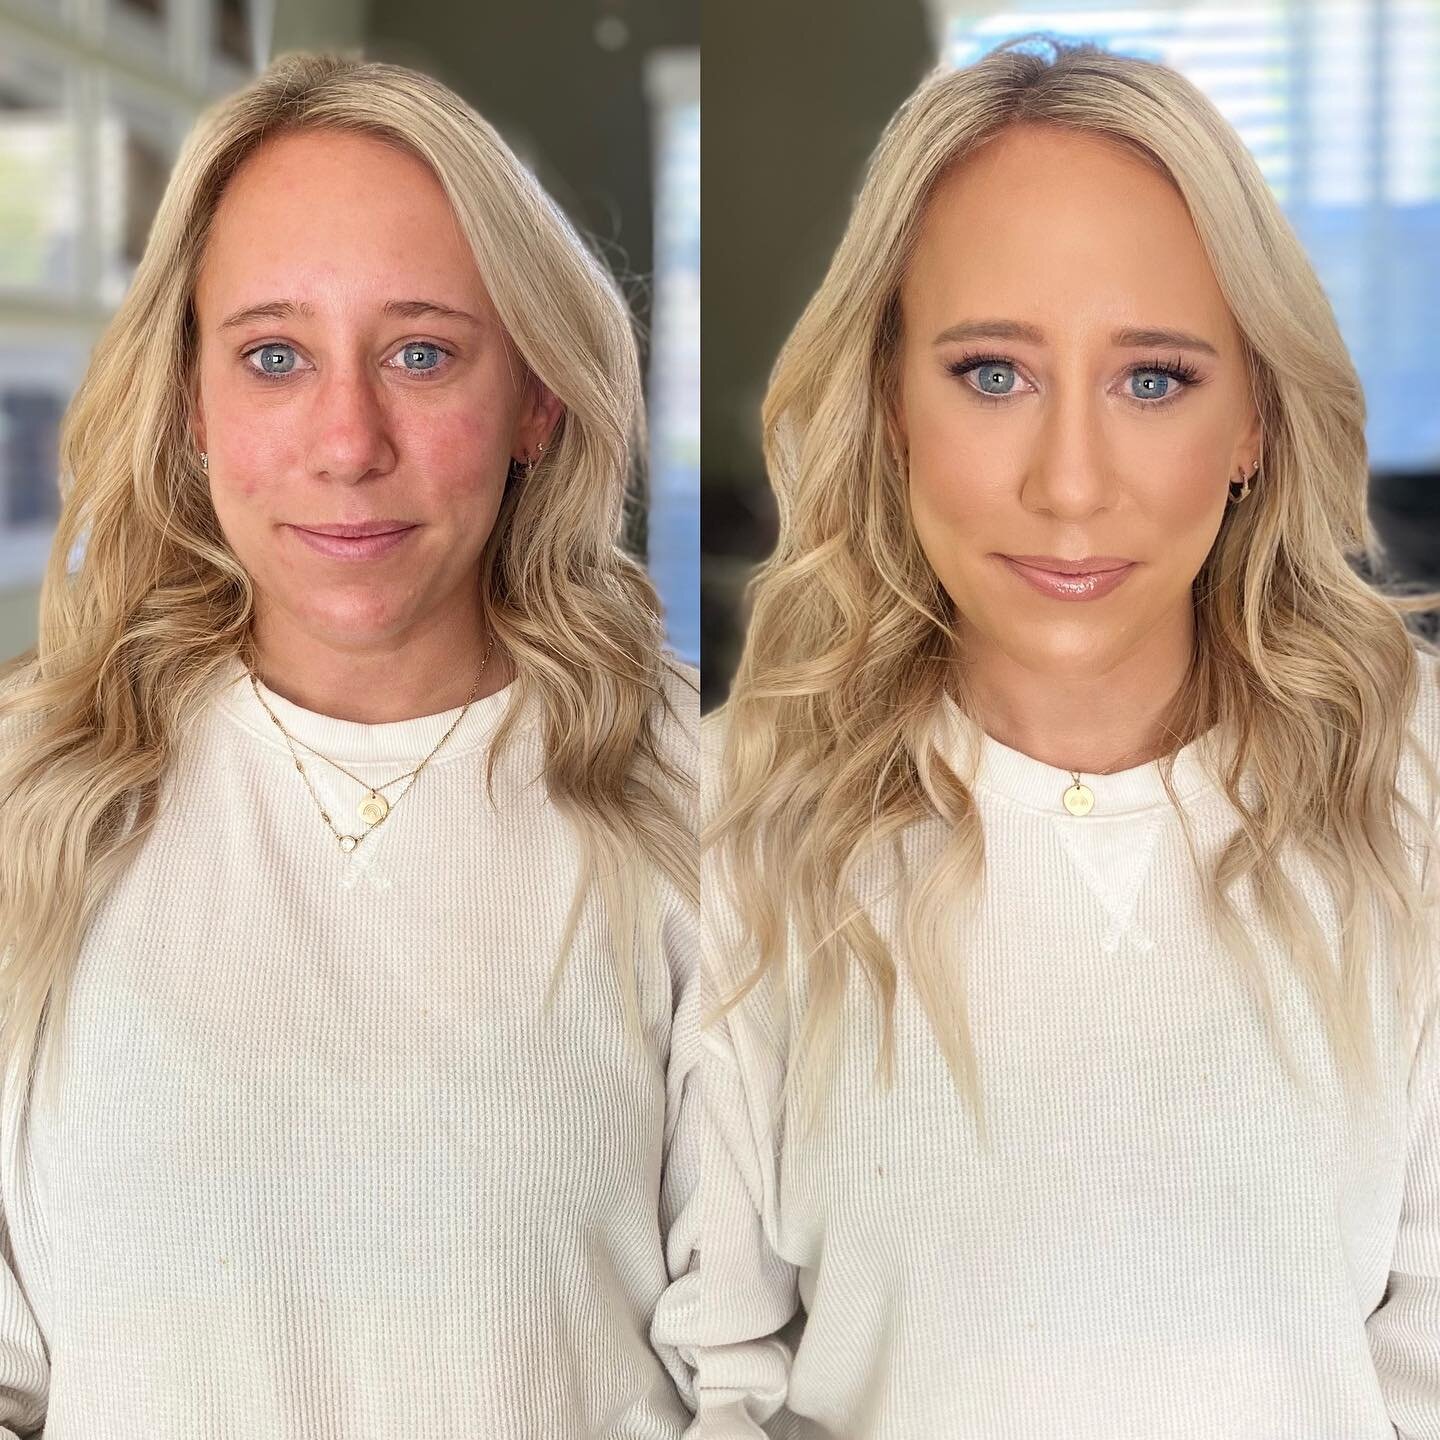 A little before and after on one of my beautiful clients today ✨
.
.
.
.
.
.
#sandiegomakeupartist #sdmakeupartist #sdmakeup #sandiegomua #makeupartist #socalmakeupartist #socalmua #makeupartistsworldwide #makeupartistsandiego #beforeandafter #before